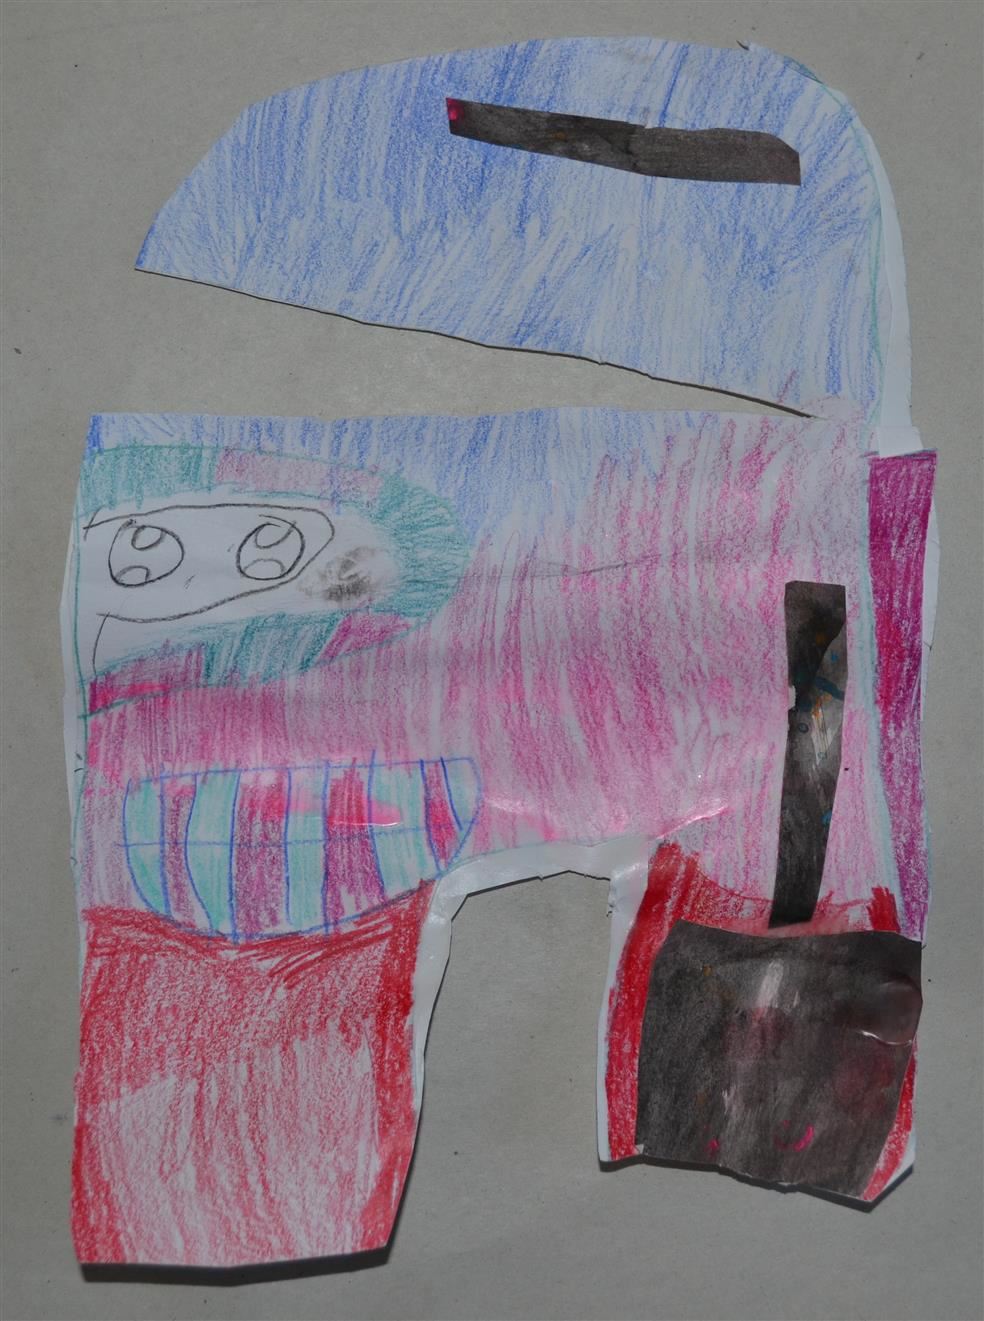 Space Robots by K.J. - 2nd Grade, Gifford